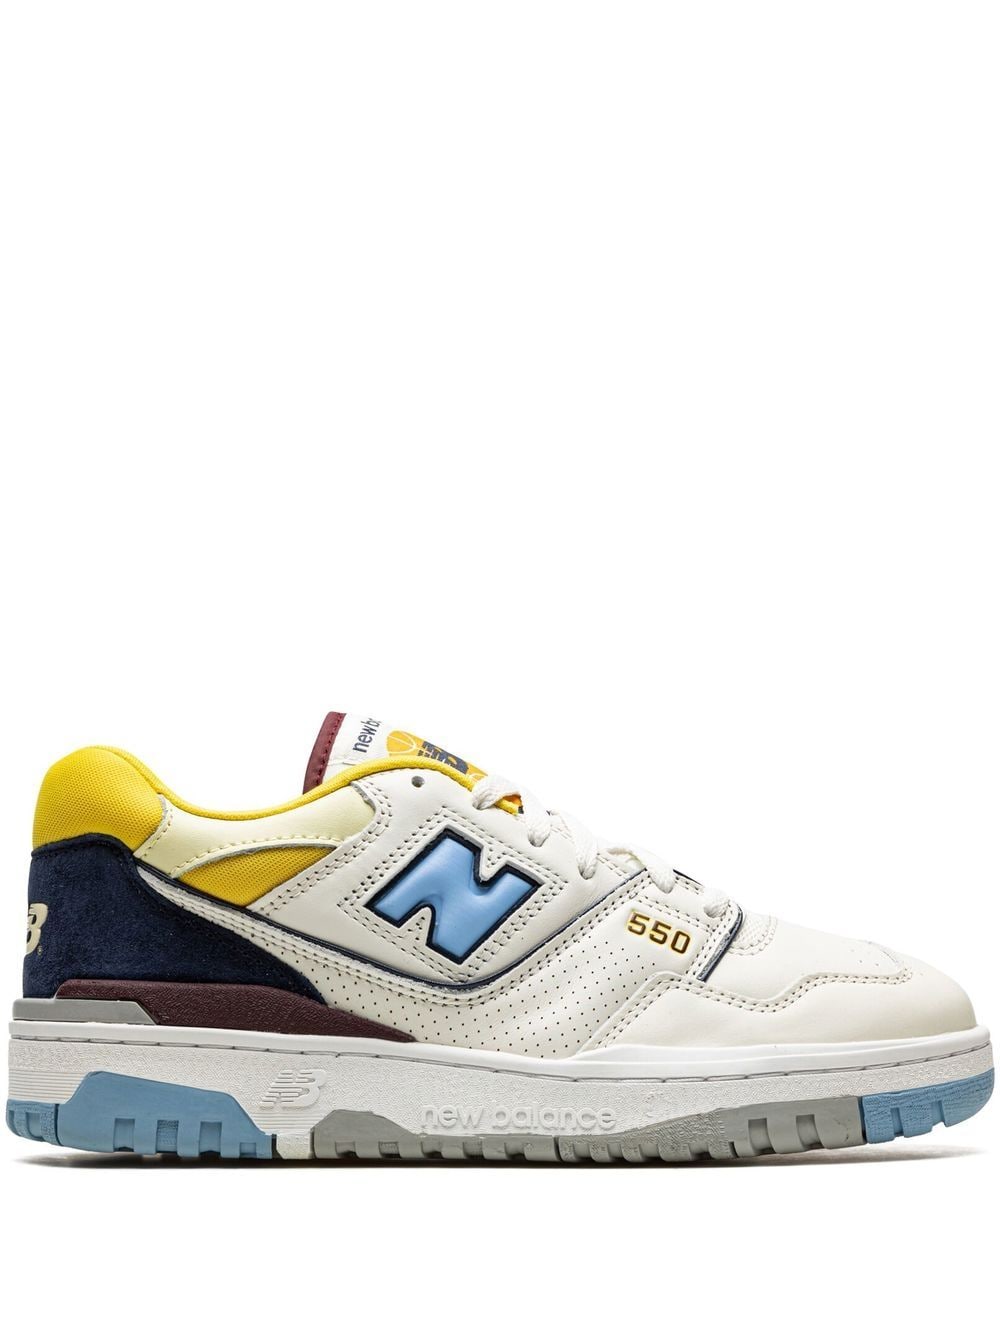 New Balance BB550 low-top sneakers - White